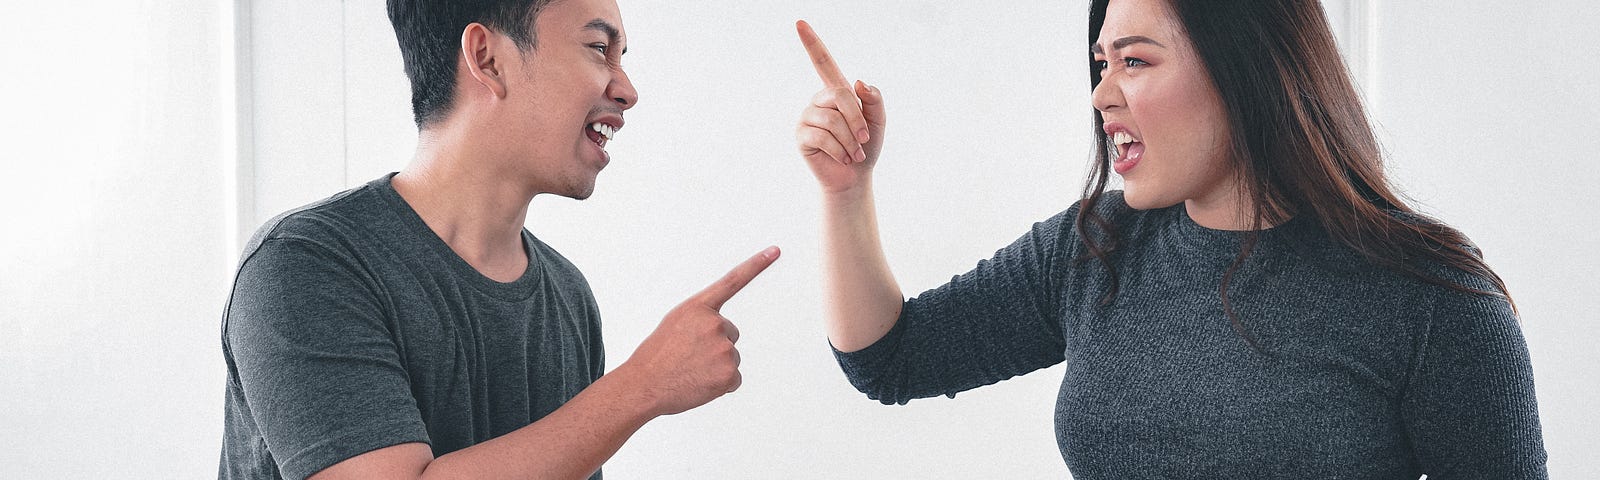 The Art of Disagreement: Navigating Arguments Constructively in Relationships